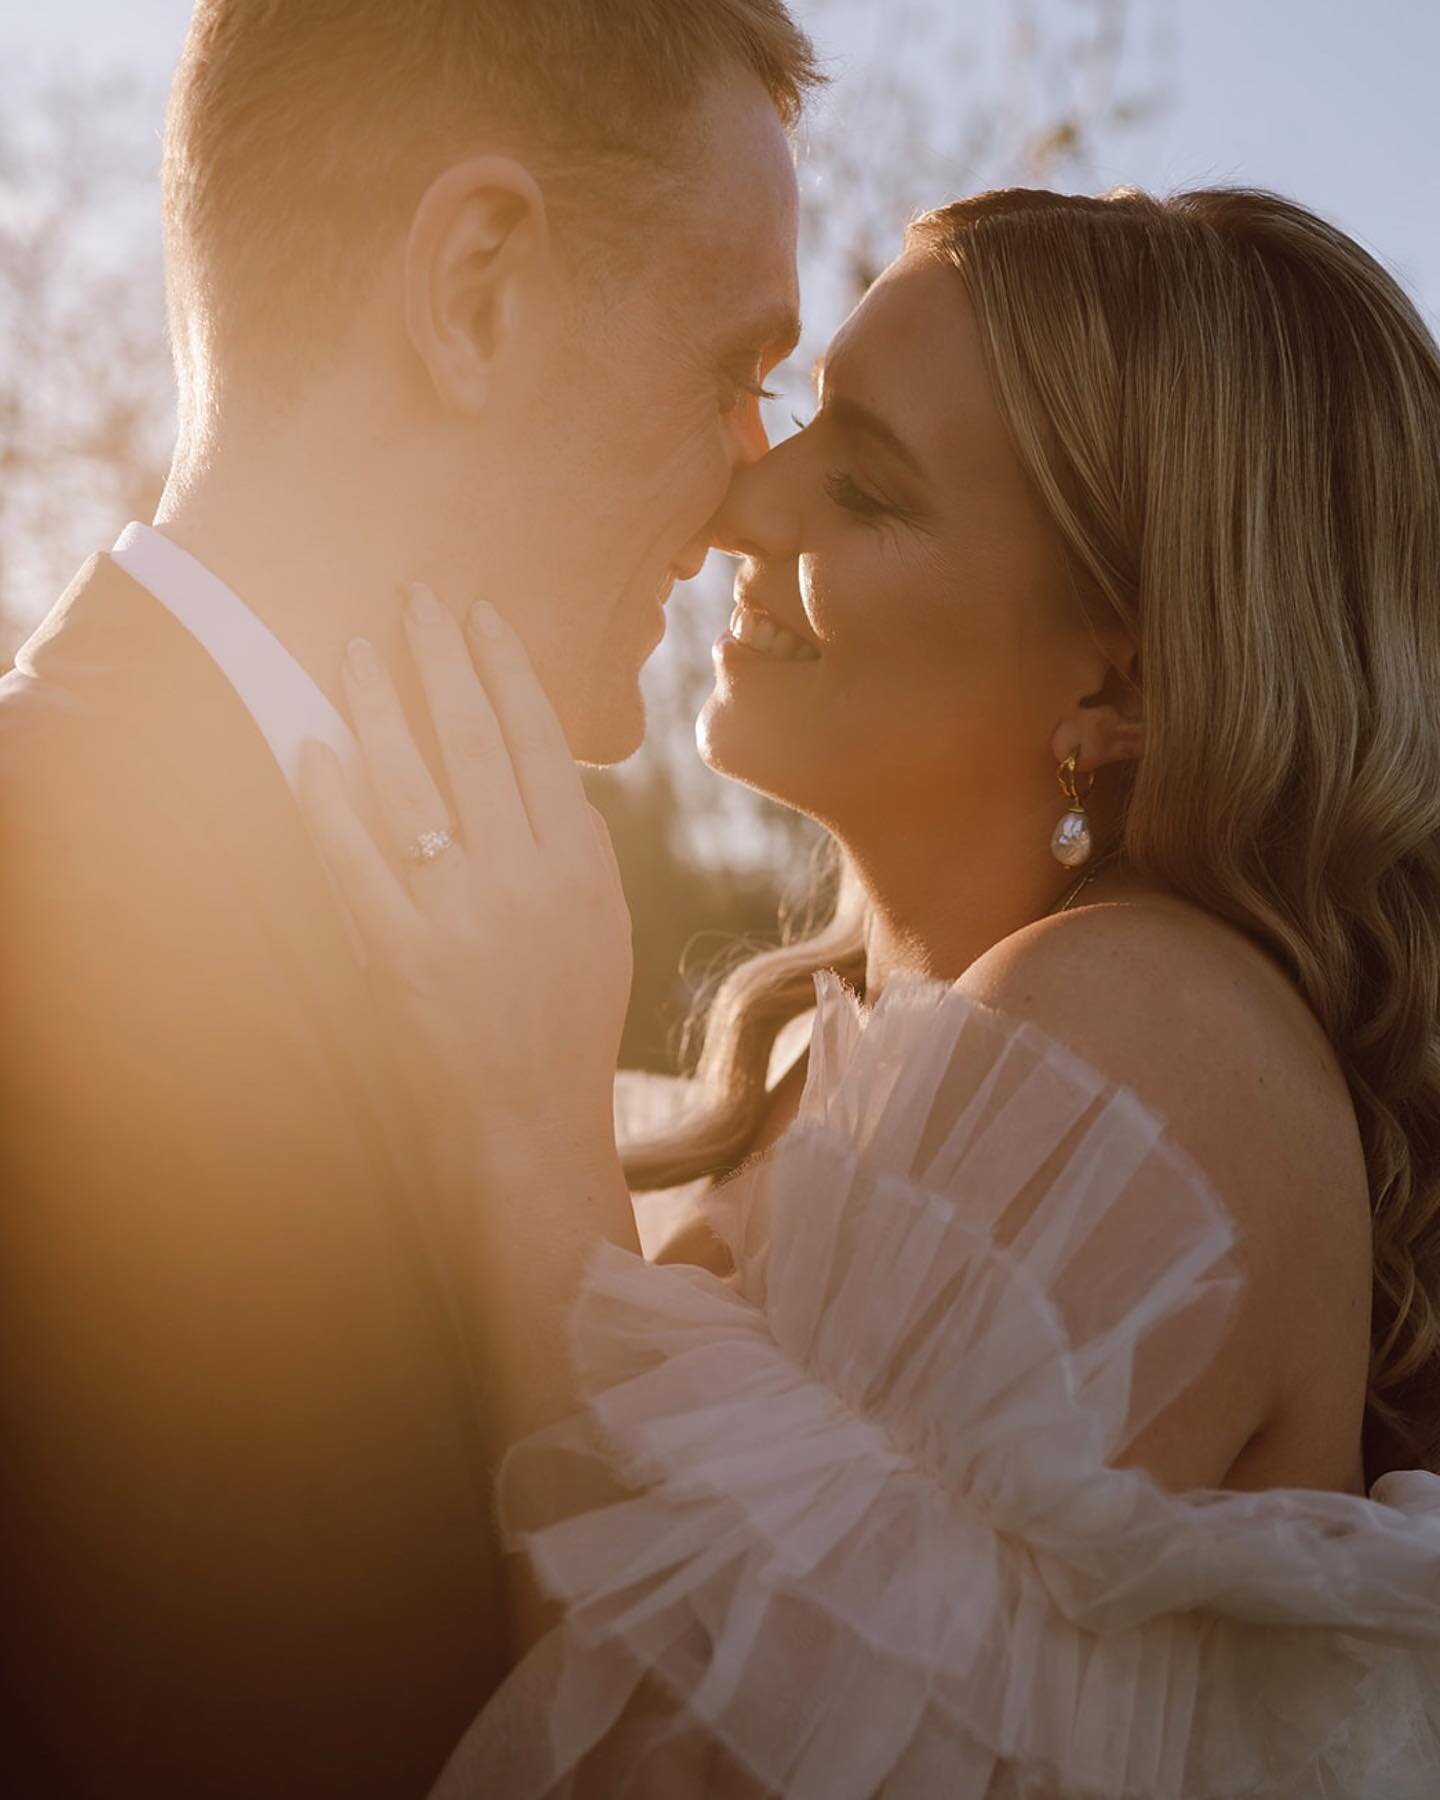 A glimpse of Saturday celebrating with Amy &amp; Matt 💐💖 

What a delight this was. A beautiful spring day, pure sunshine and an epic golden hour to finish the day. Thank you Easter weekend! Swipe to the last frame for one of my favourites 🥹

@the